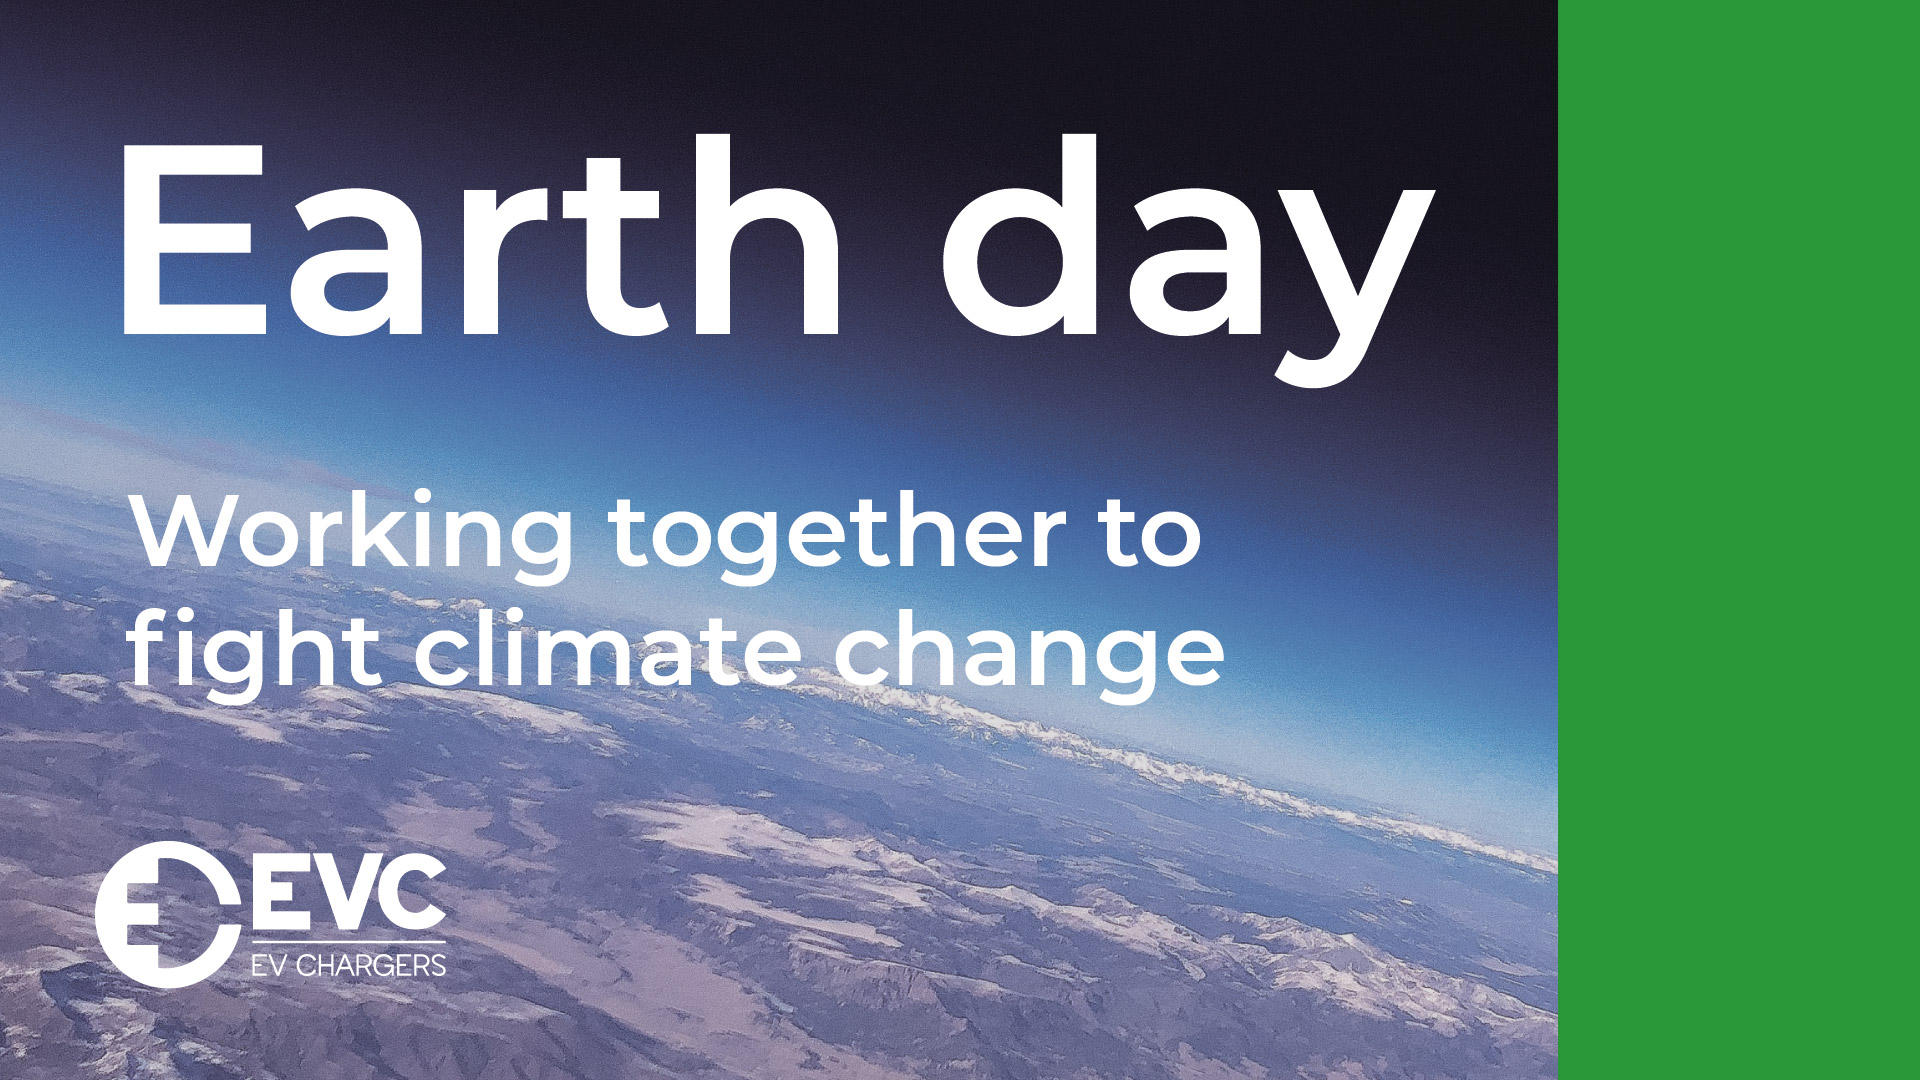 3 ways to make a change this Earth Day